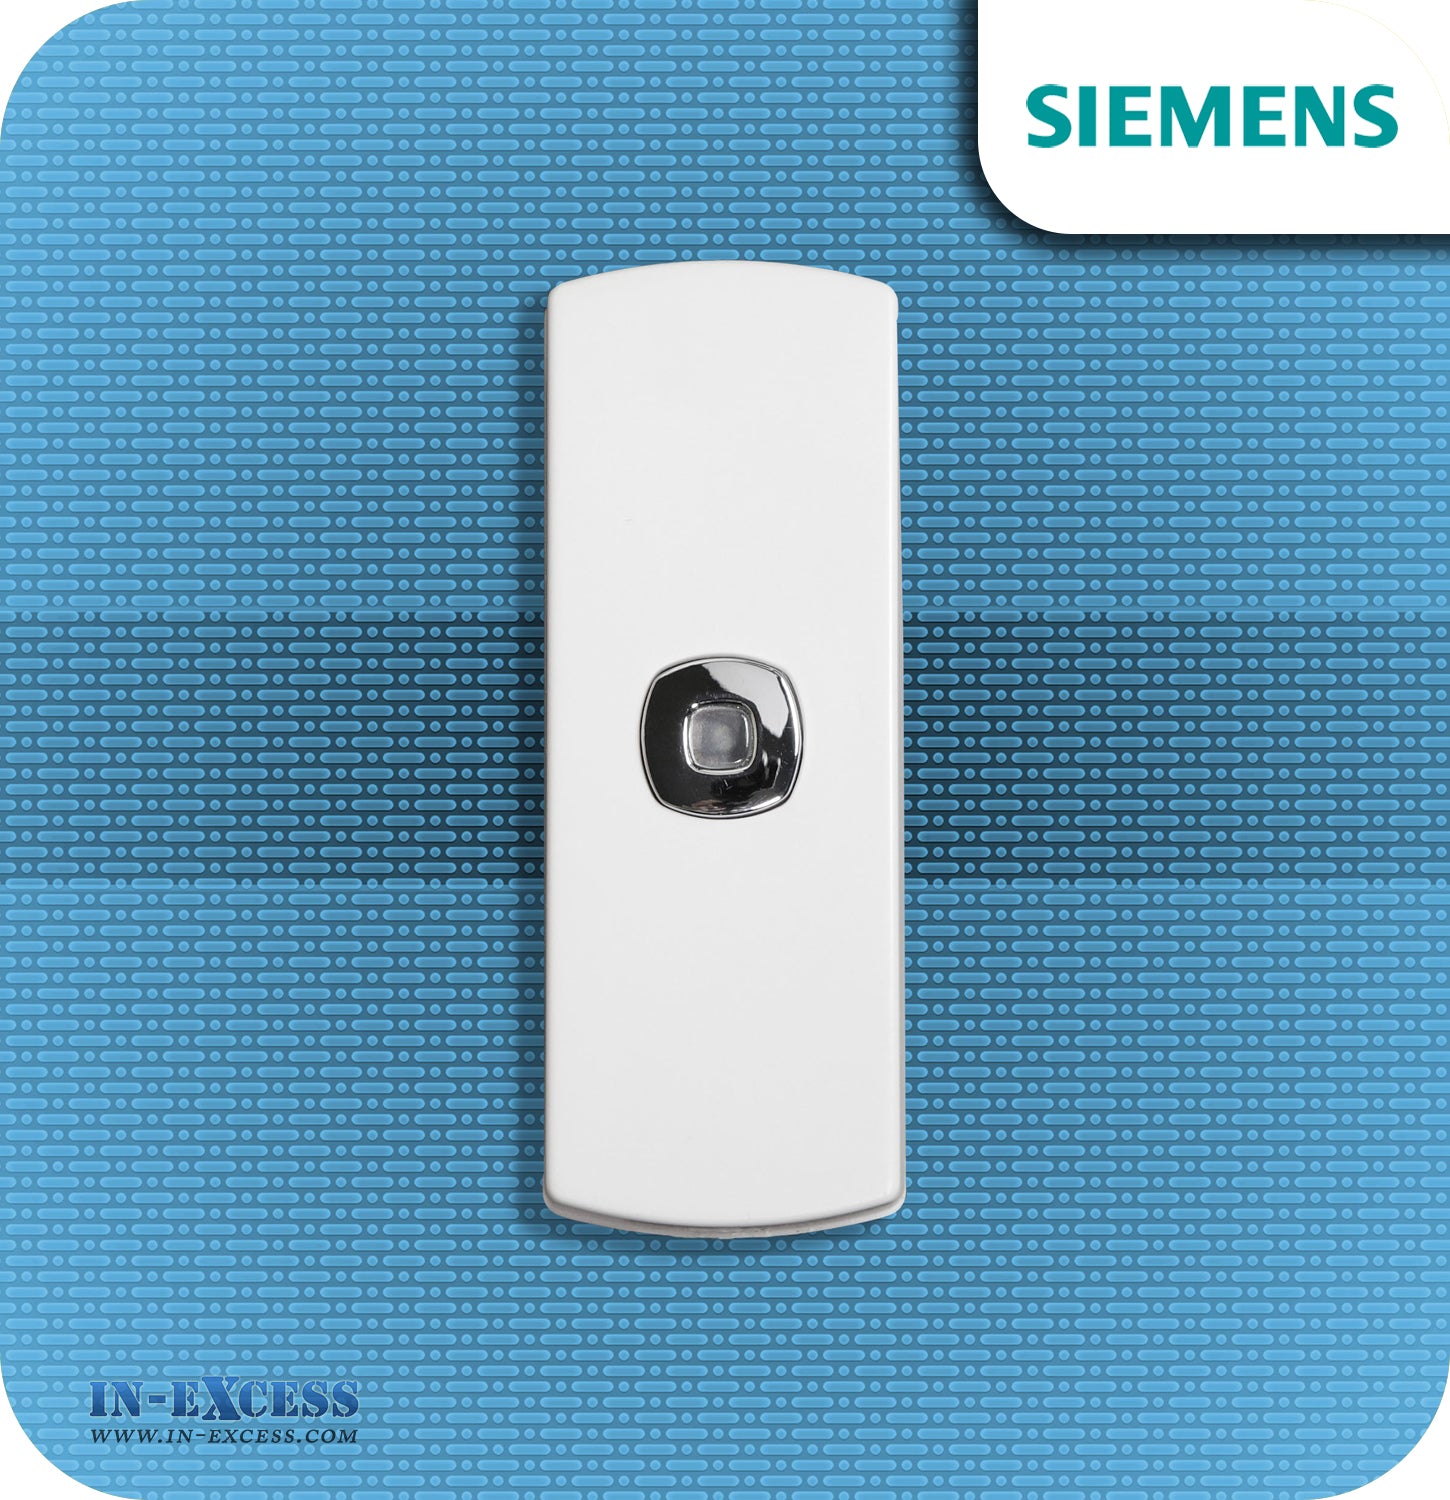 Siemens Cubist Wirefree Portable Door Bell Chime Kit JSJS-215- With JSJS-104W Bell Push